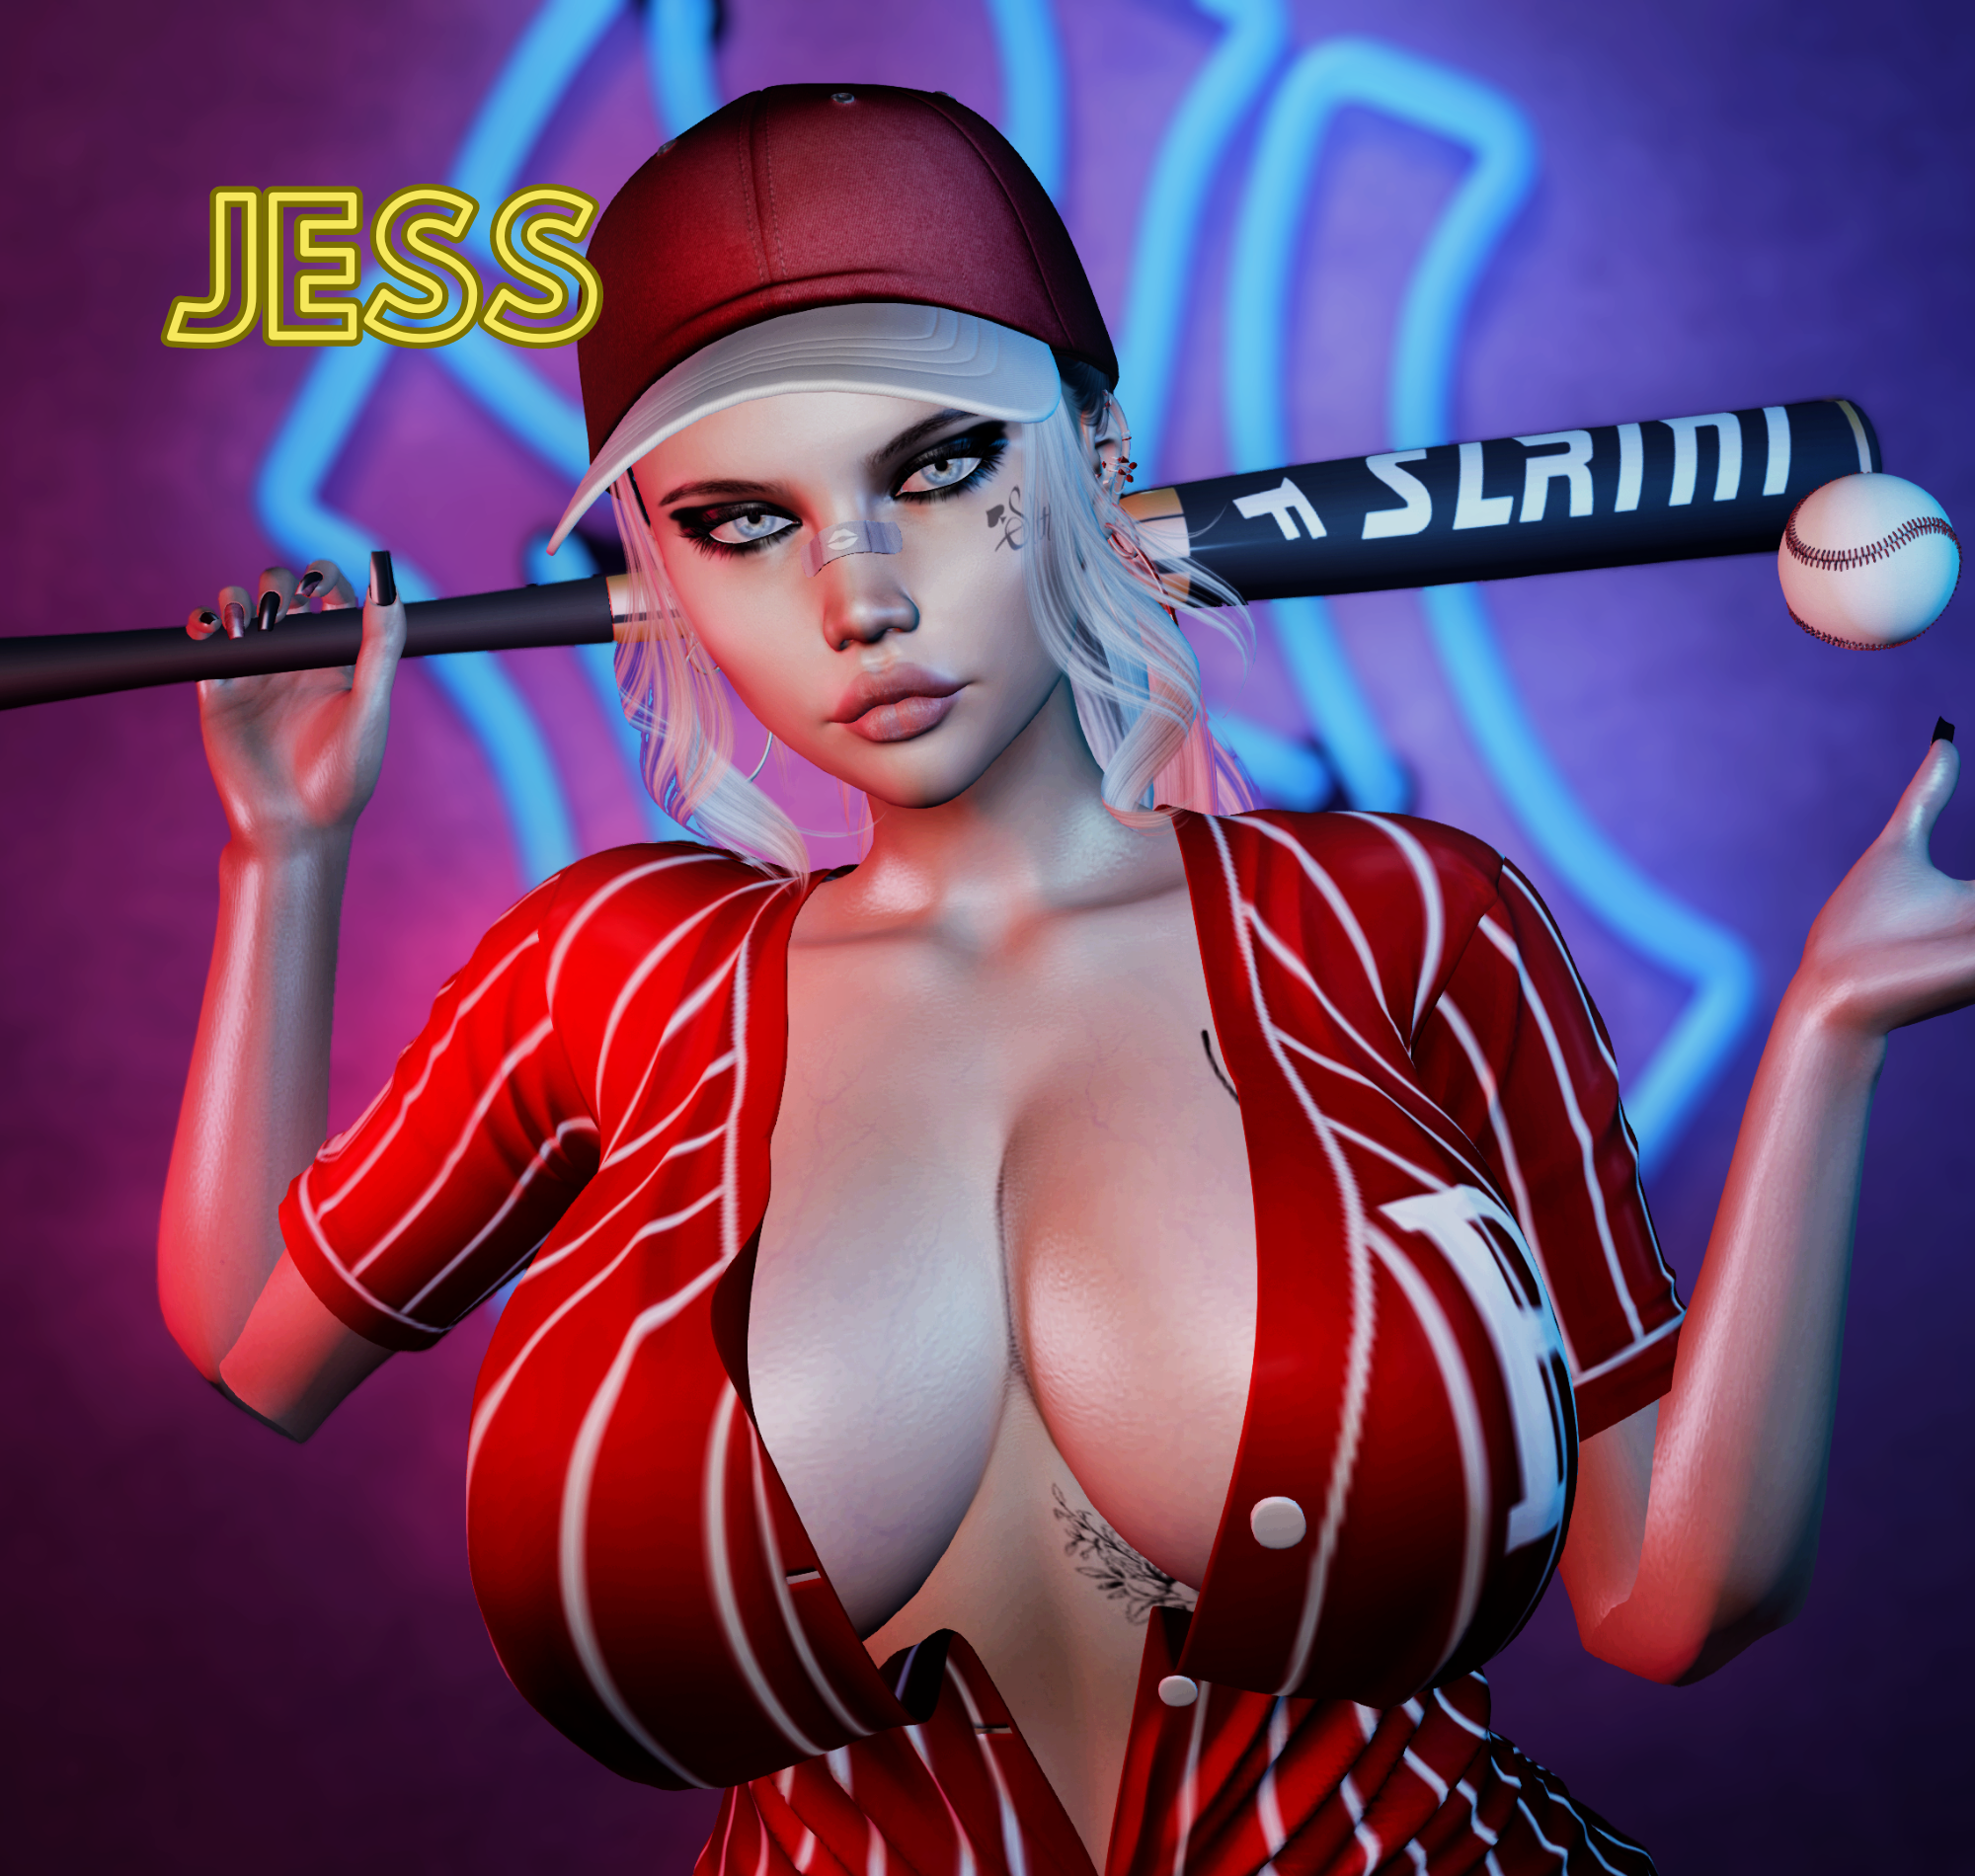 Owner and creator of the X-Sisters Sex Bar and X-Sisters Entertainment. Jess started her career as a Second Life Blogger focusing on her life as a Second Life Escort. Now she owns one of the best places to have sex in Second Life. 